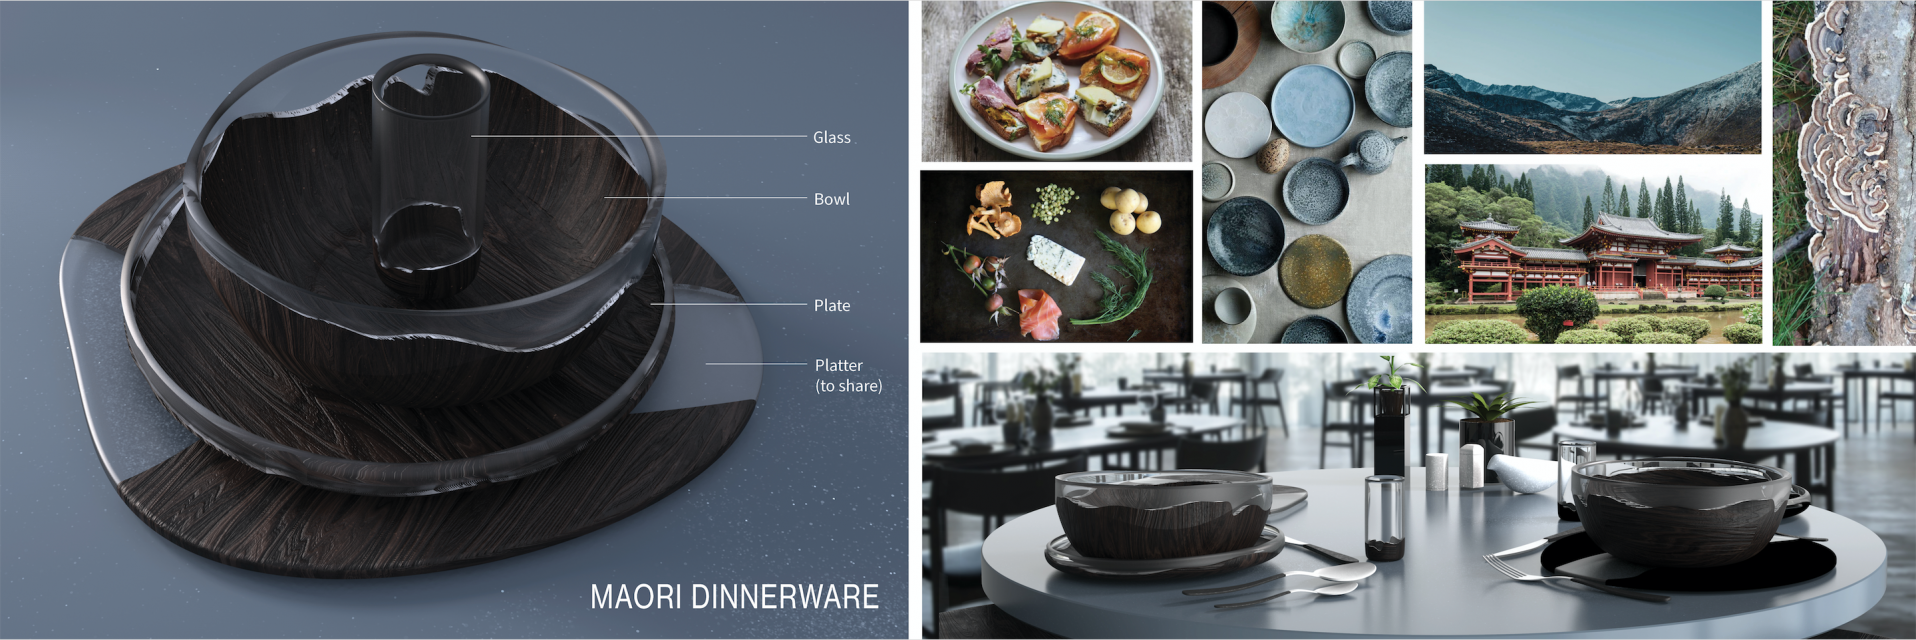 A rendering of a set of dinnerware, with a set of mood-board photos next to it.